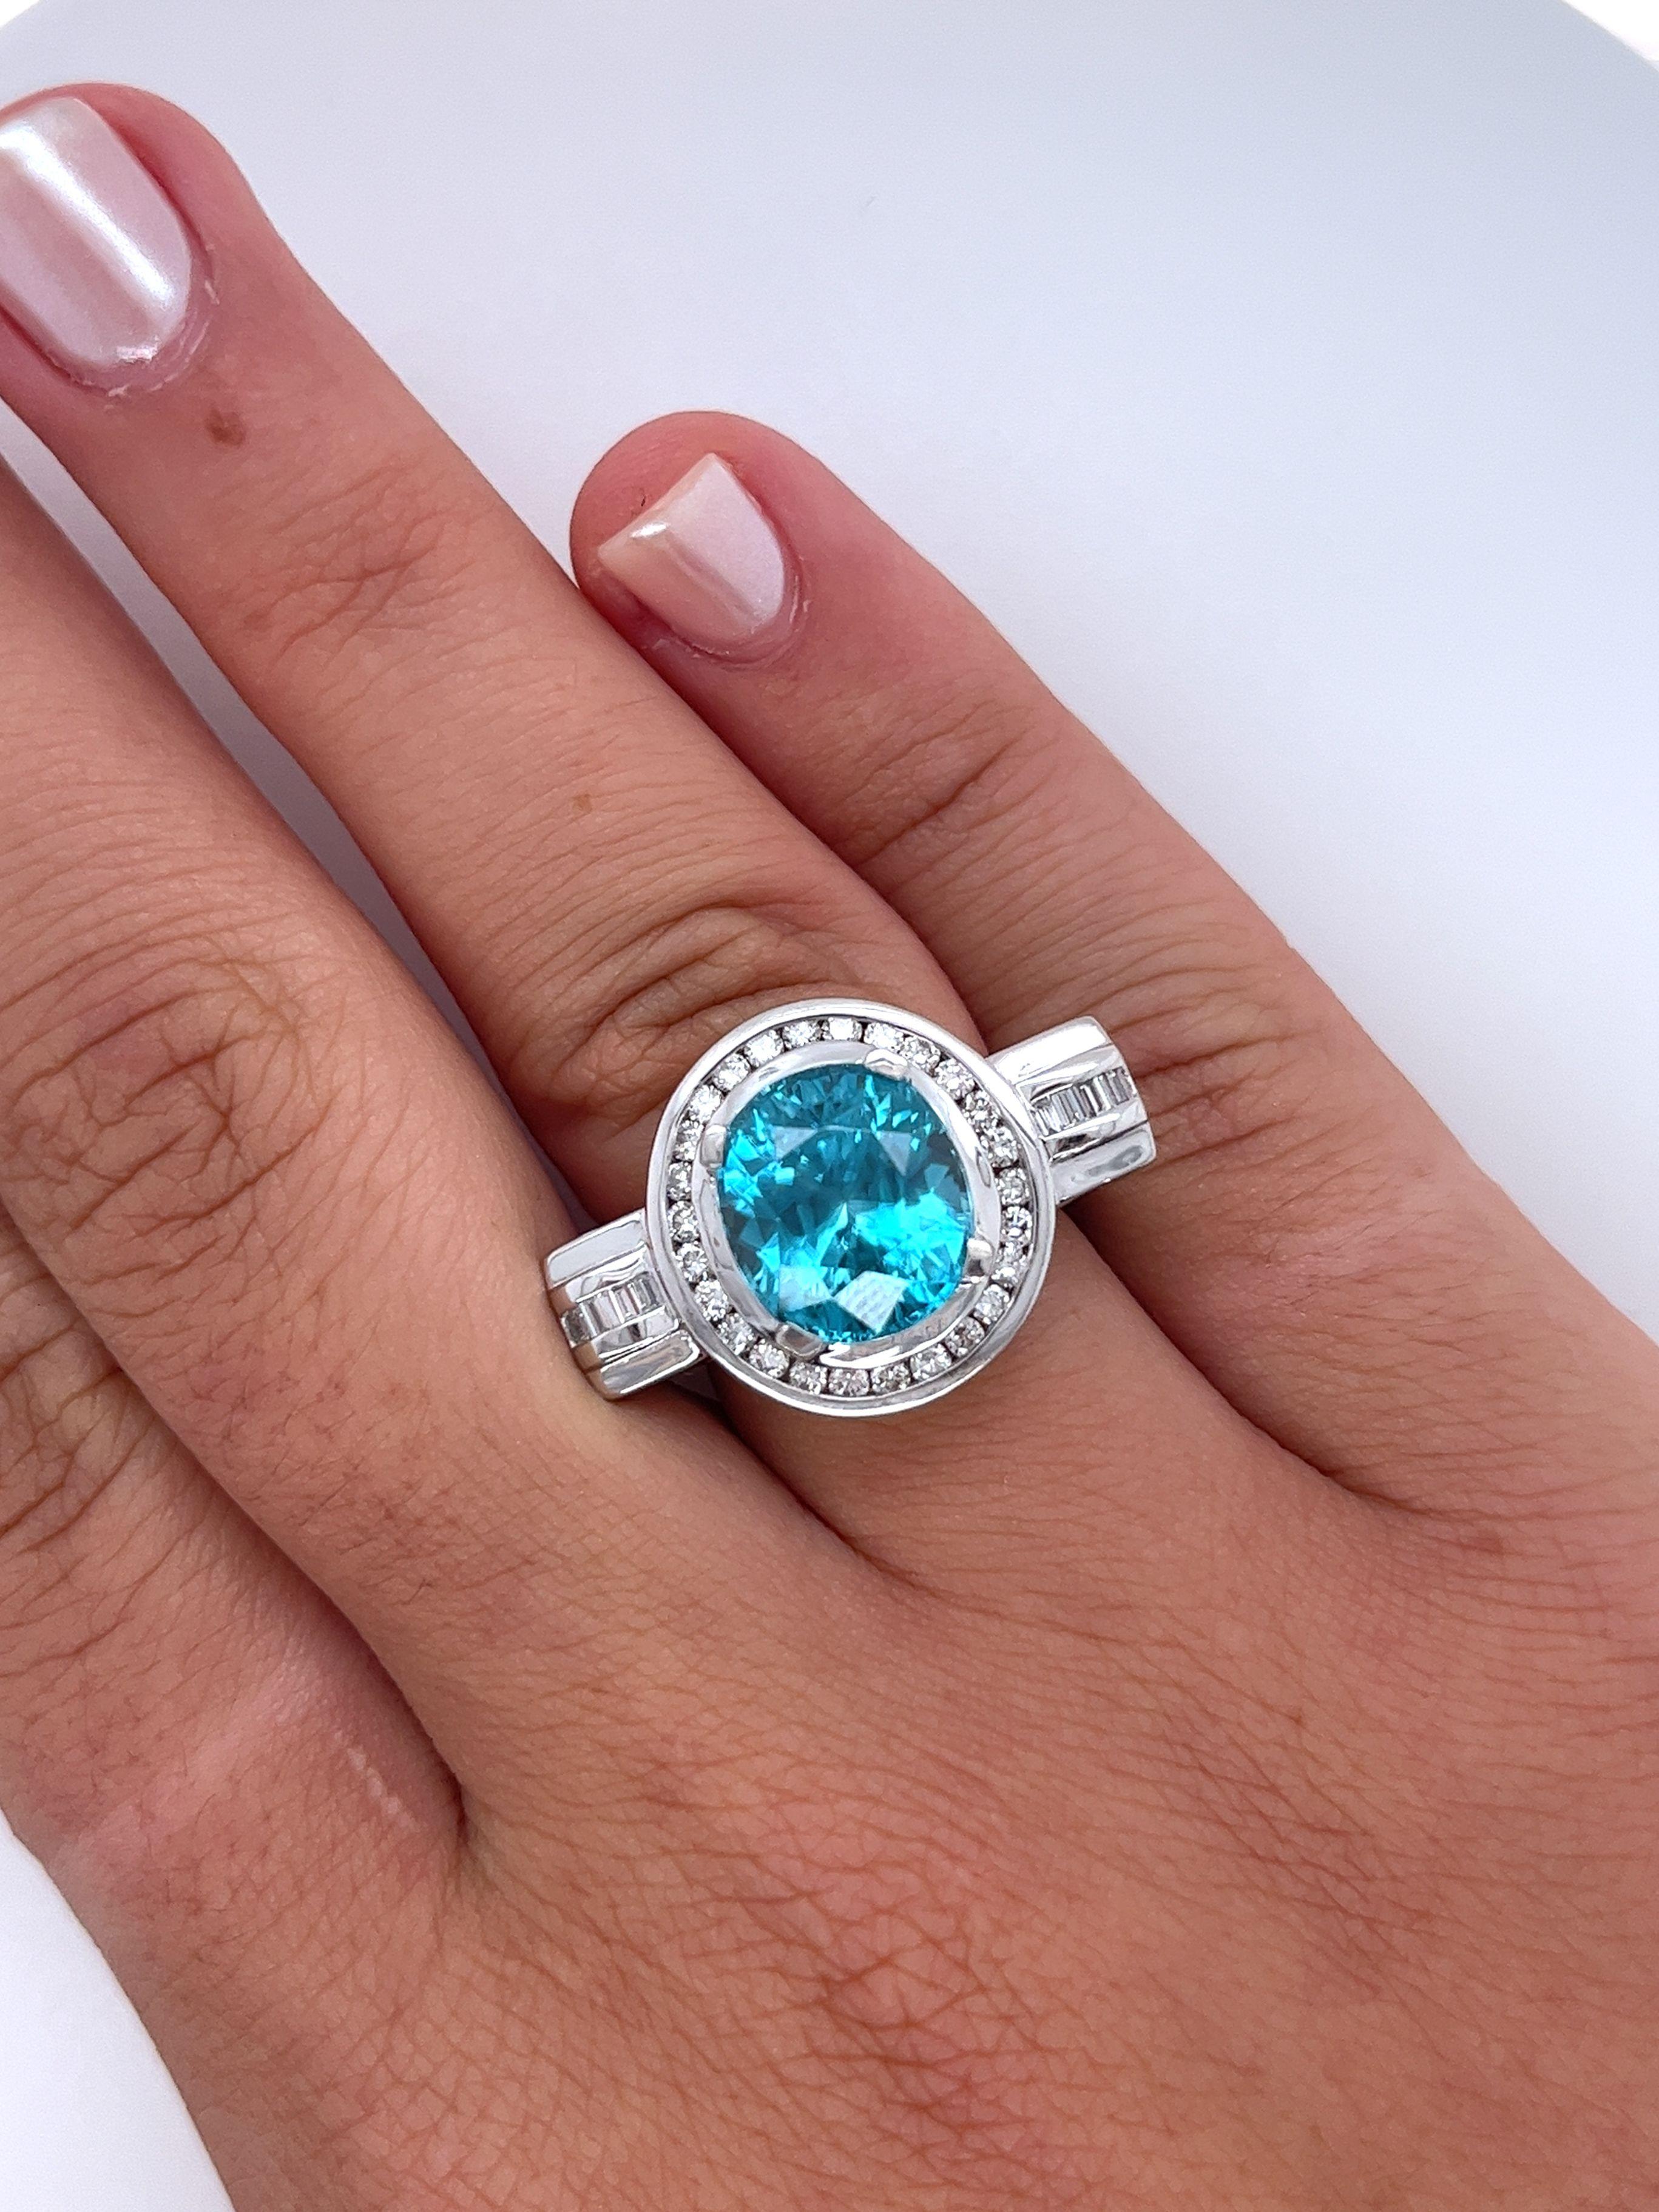 Vintage 8 carat oval cut Blue Zircon and Diamond ring. Featuring a platinum ring setting with an 18k gold floral filigree basket. The Blue Zircon center stone is exploding with brilliance, color, and luster. A remarkably clean gem.

The ring's